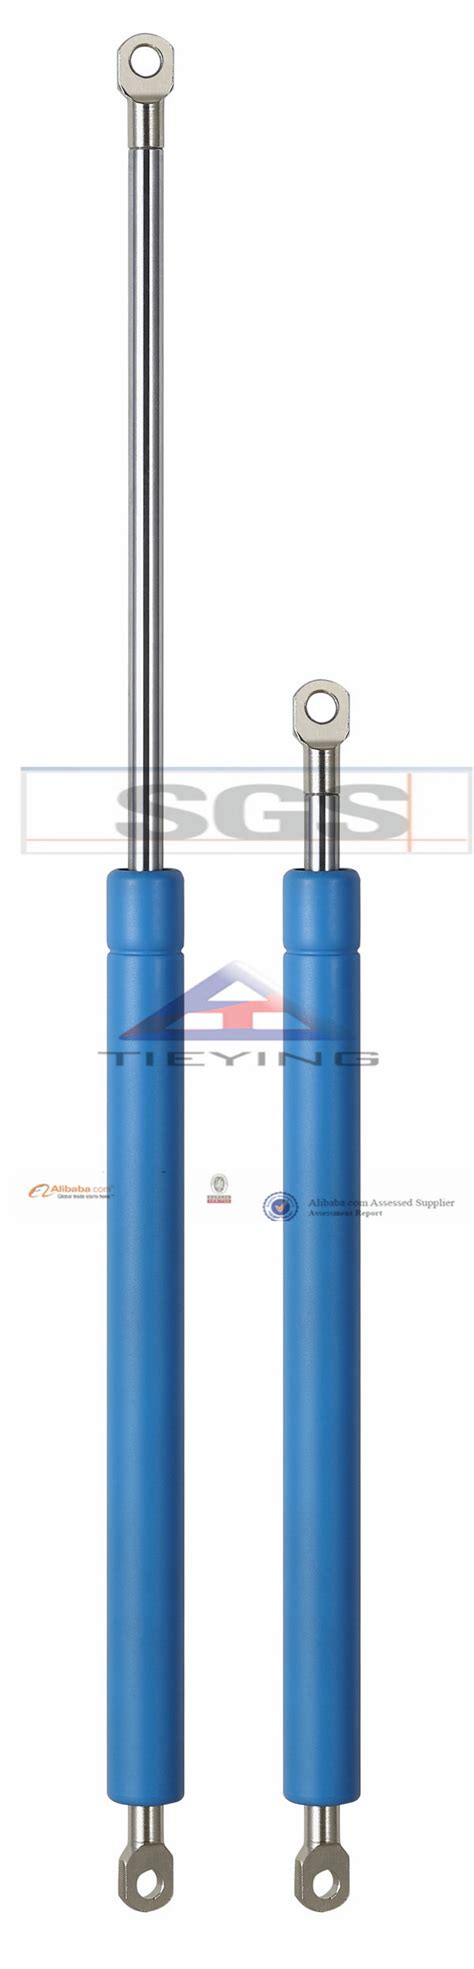 cylinder style furniture gas struts  bed gas spring lift supports